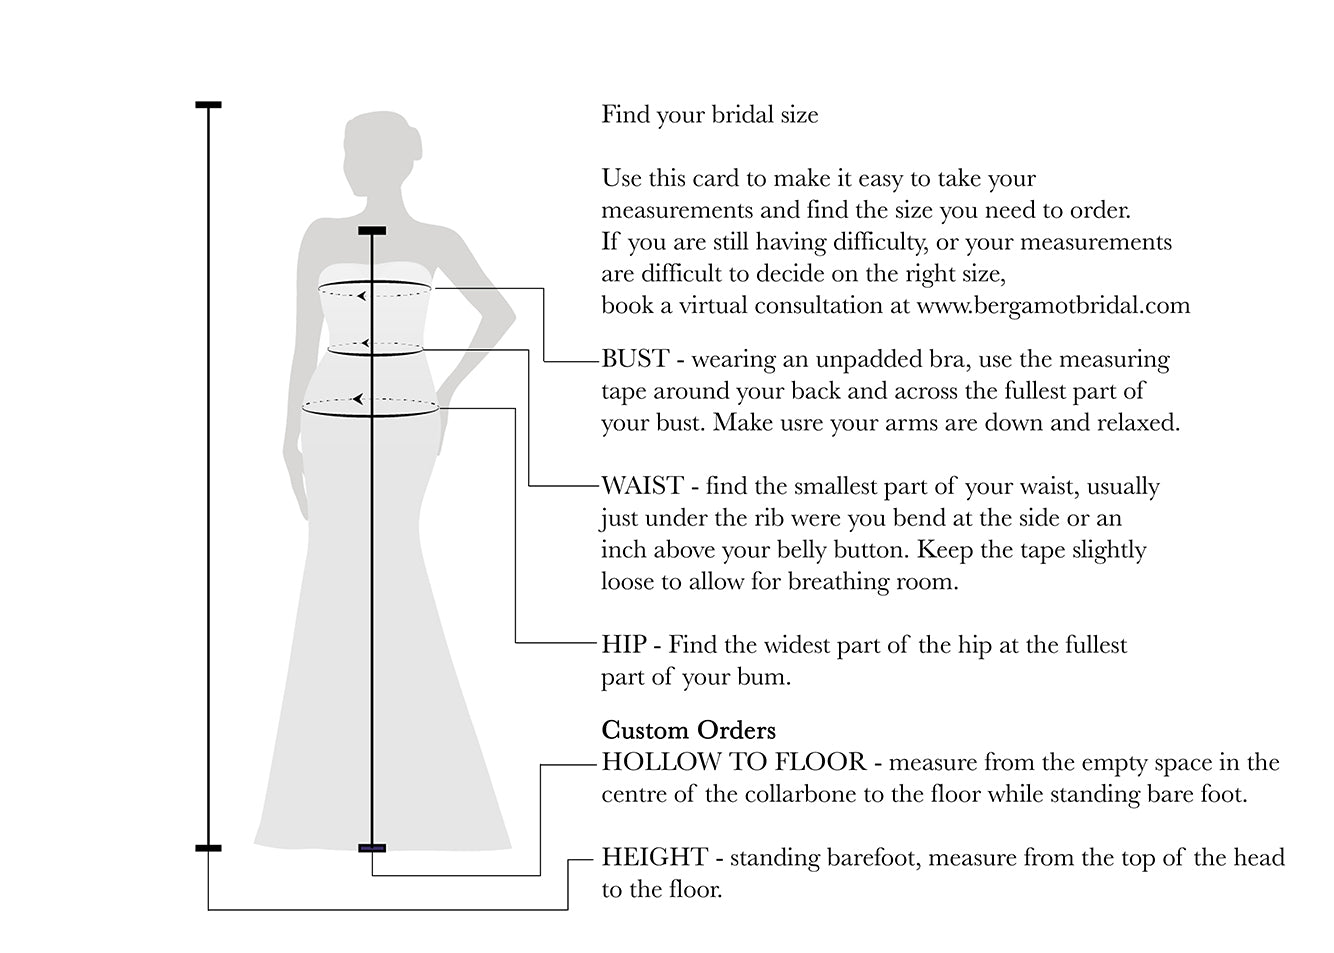 A diagram showing how to take body measurements for a Bergamot Bridal Sequined Lace Square Neckline Sheath Wedding Dress, with instructions for measuring bust, waist, hips, and hollow to floor.